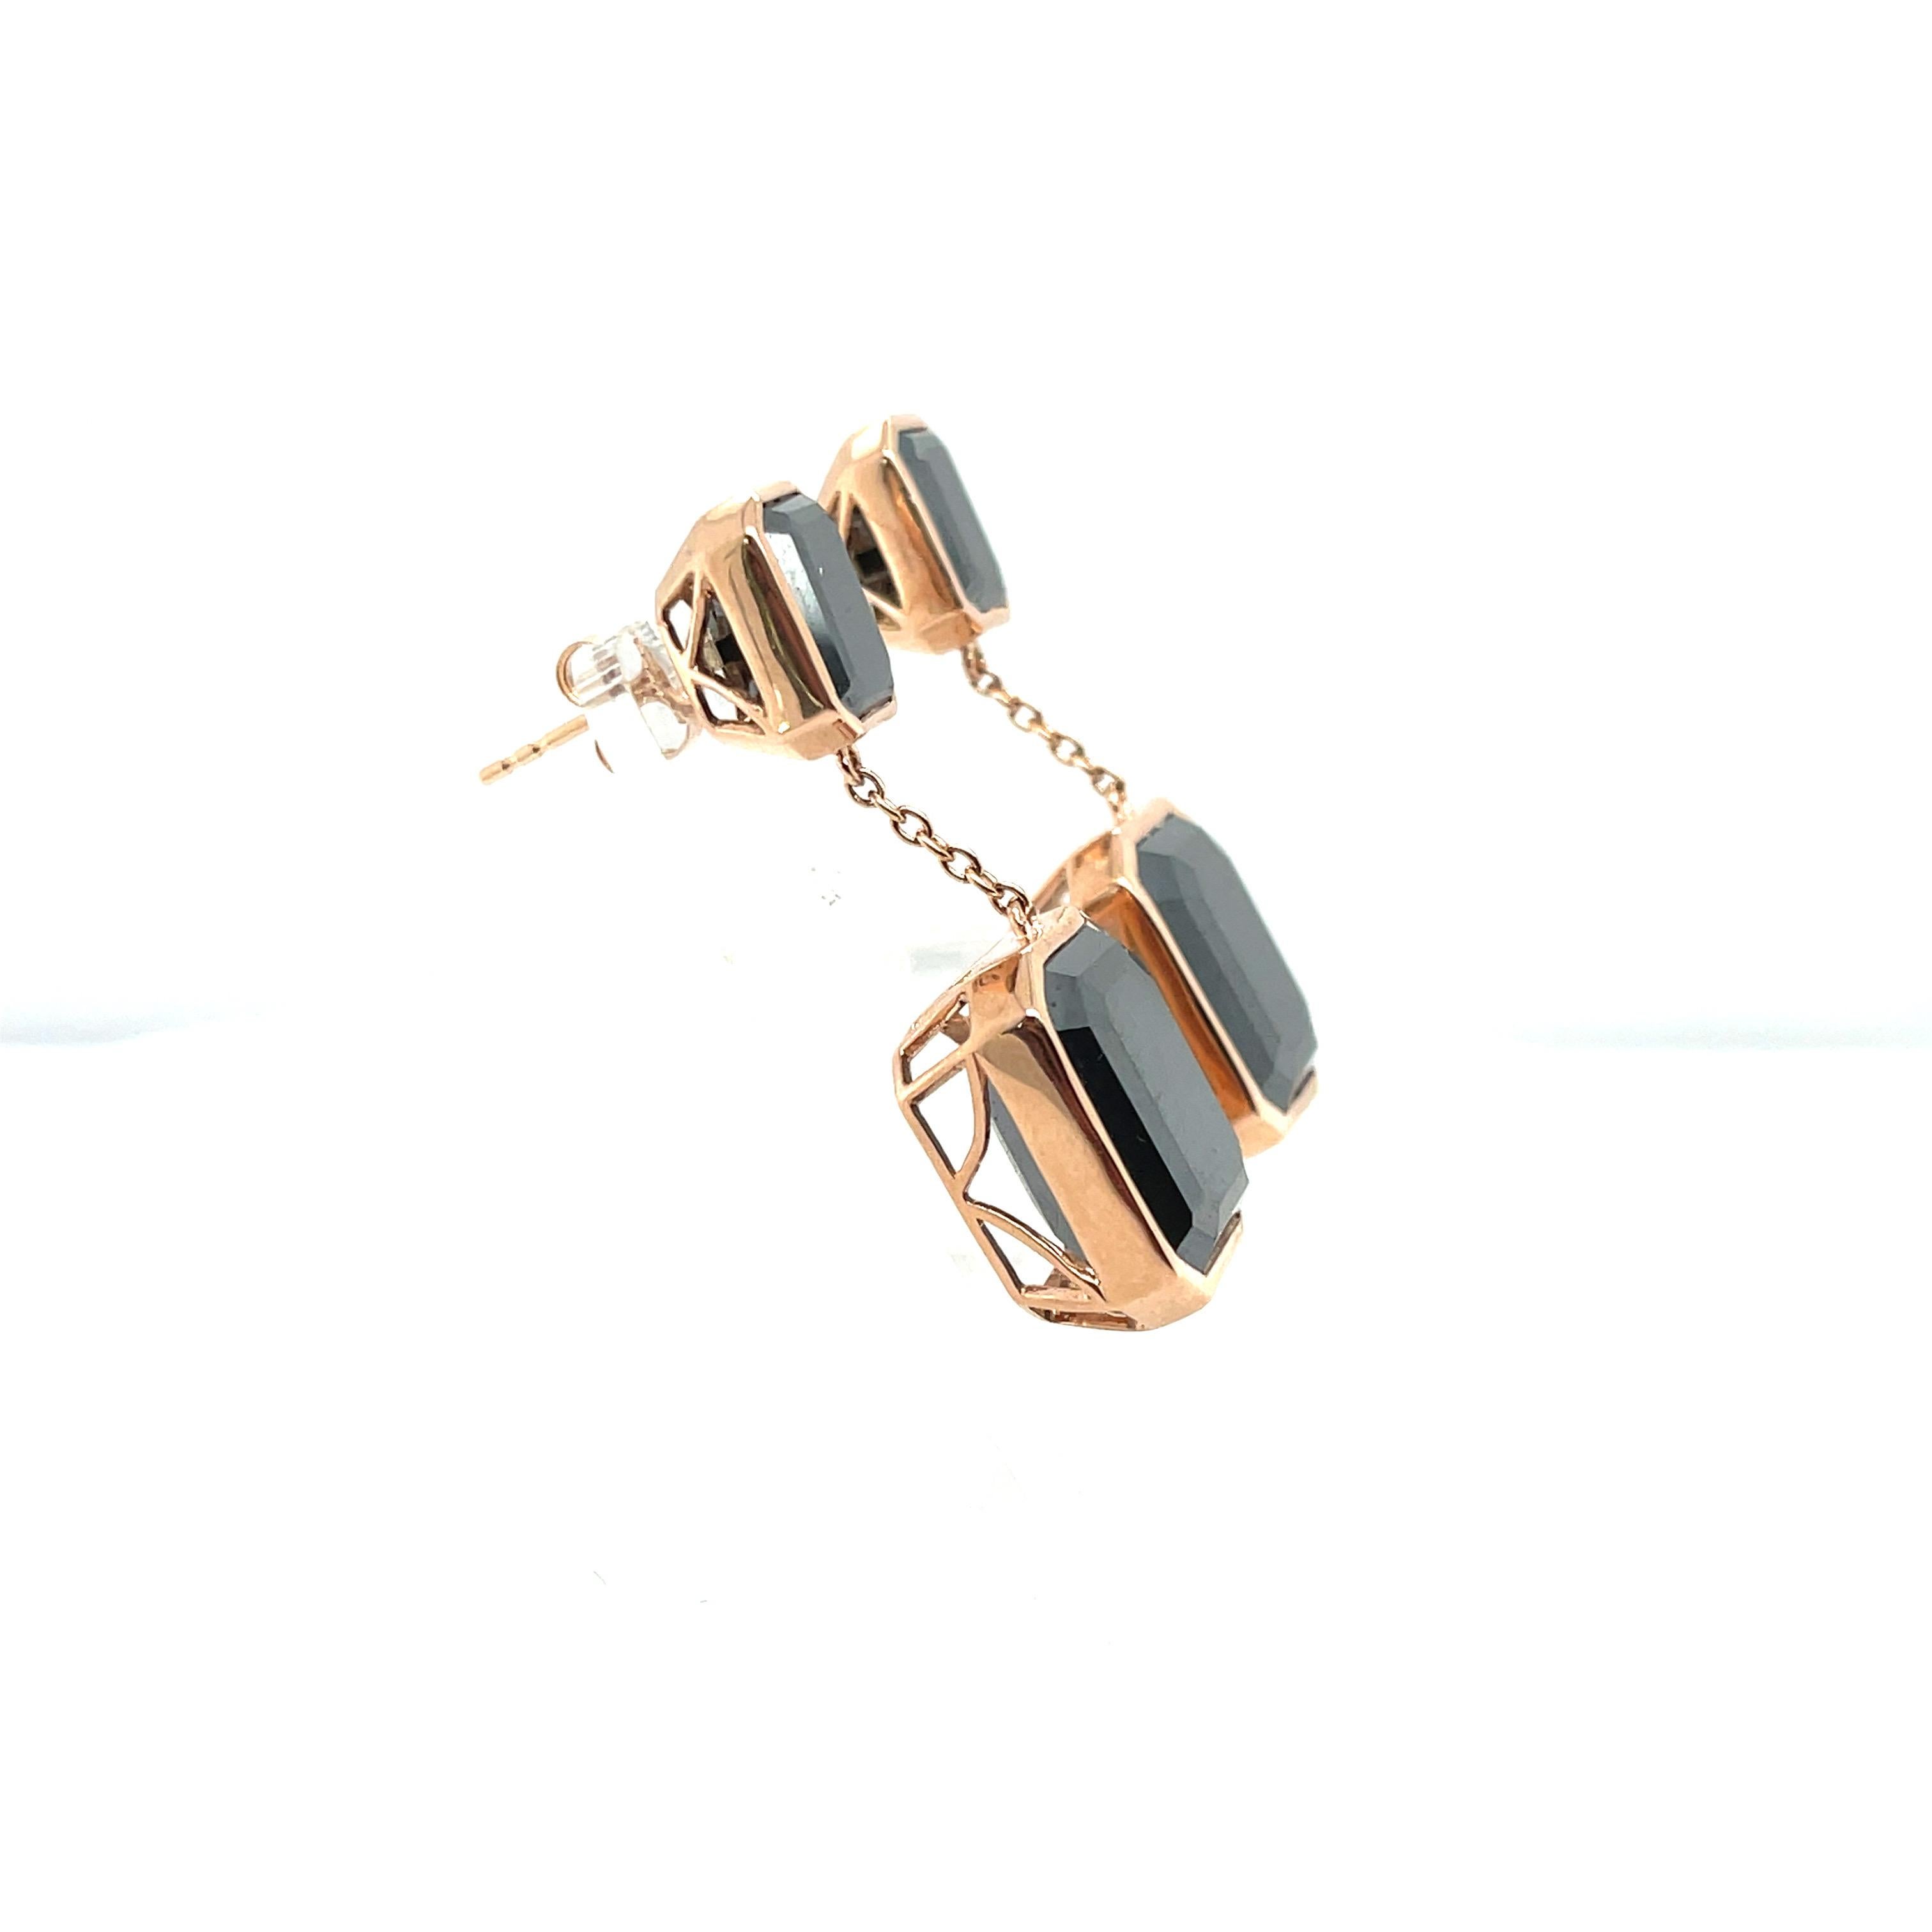 Lovely pair of black moissanites and diamond stud earrings, gorgeously crafted in fourteen karat rose gold, complimented by a stunning polished finish design.

 One pair of ladies - 14ct rose gold drop stud earrings, polished finish, with